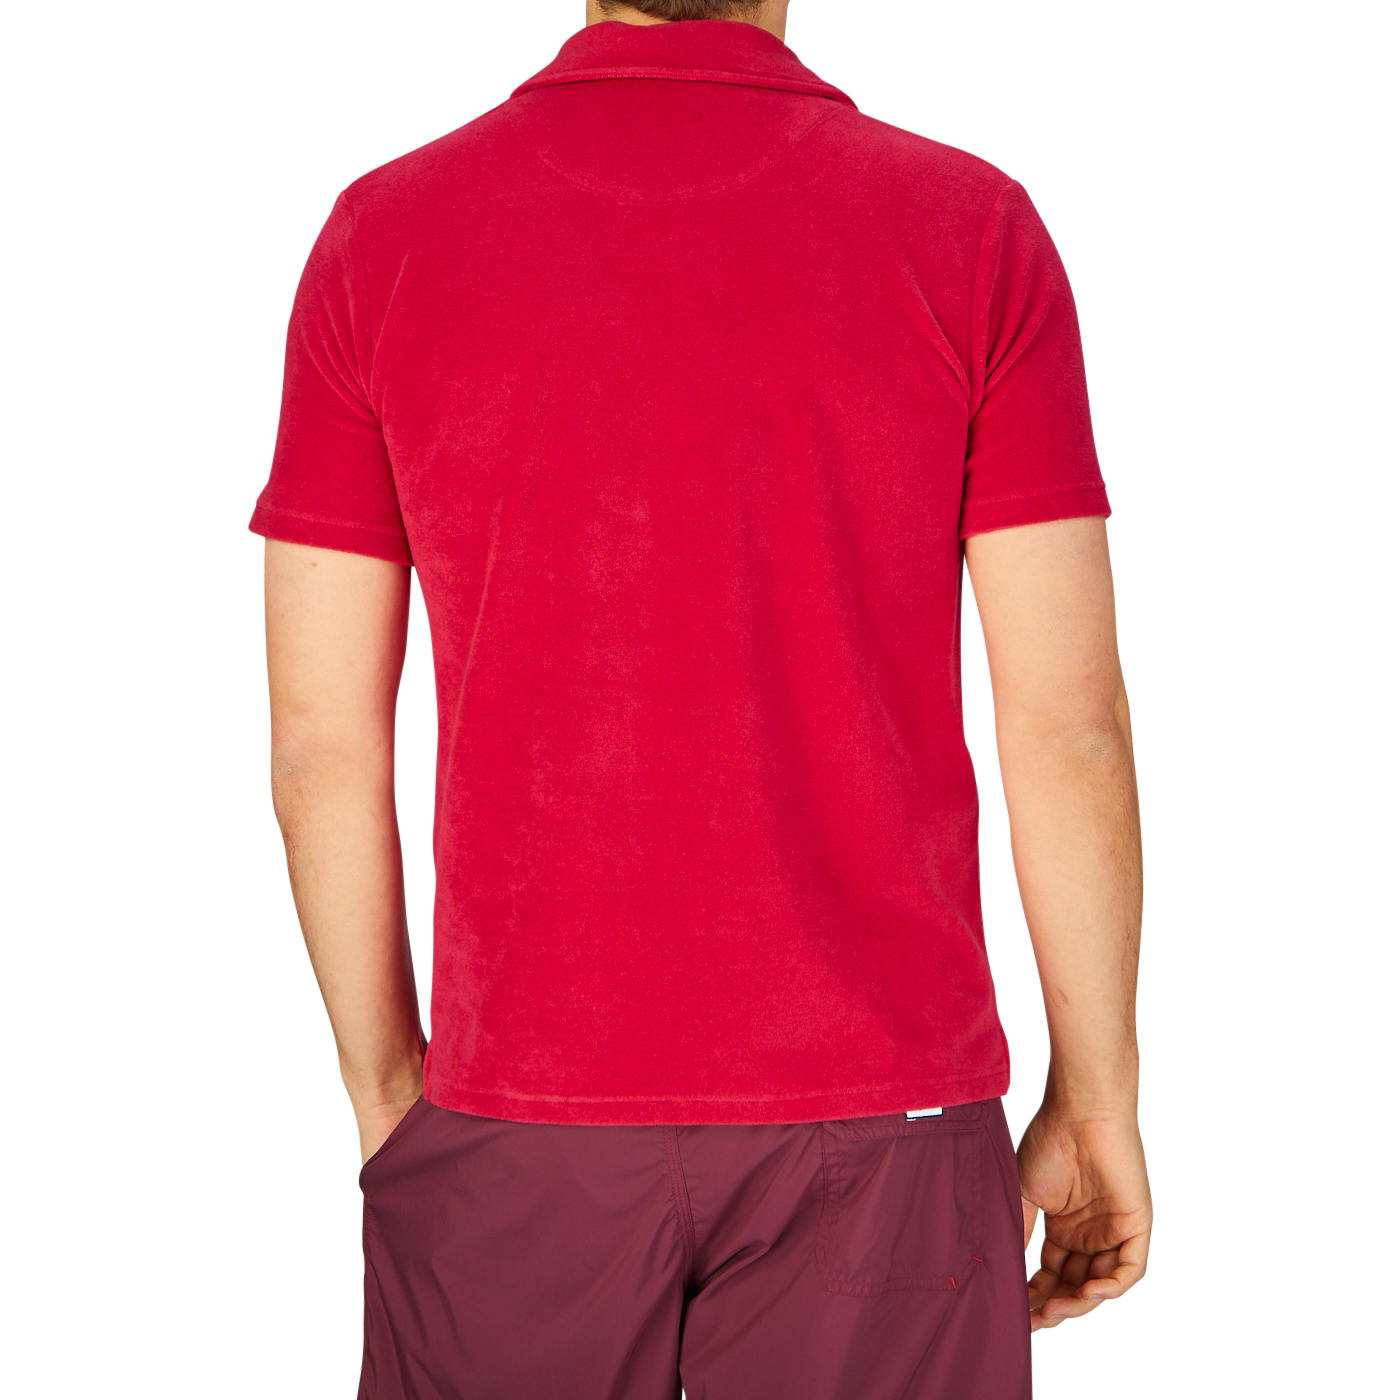 Rear view of a person wearing an Altea Coral Red Cotton Towelling Capri Collar Polo Shirt and maroon shorts against a grey background.